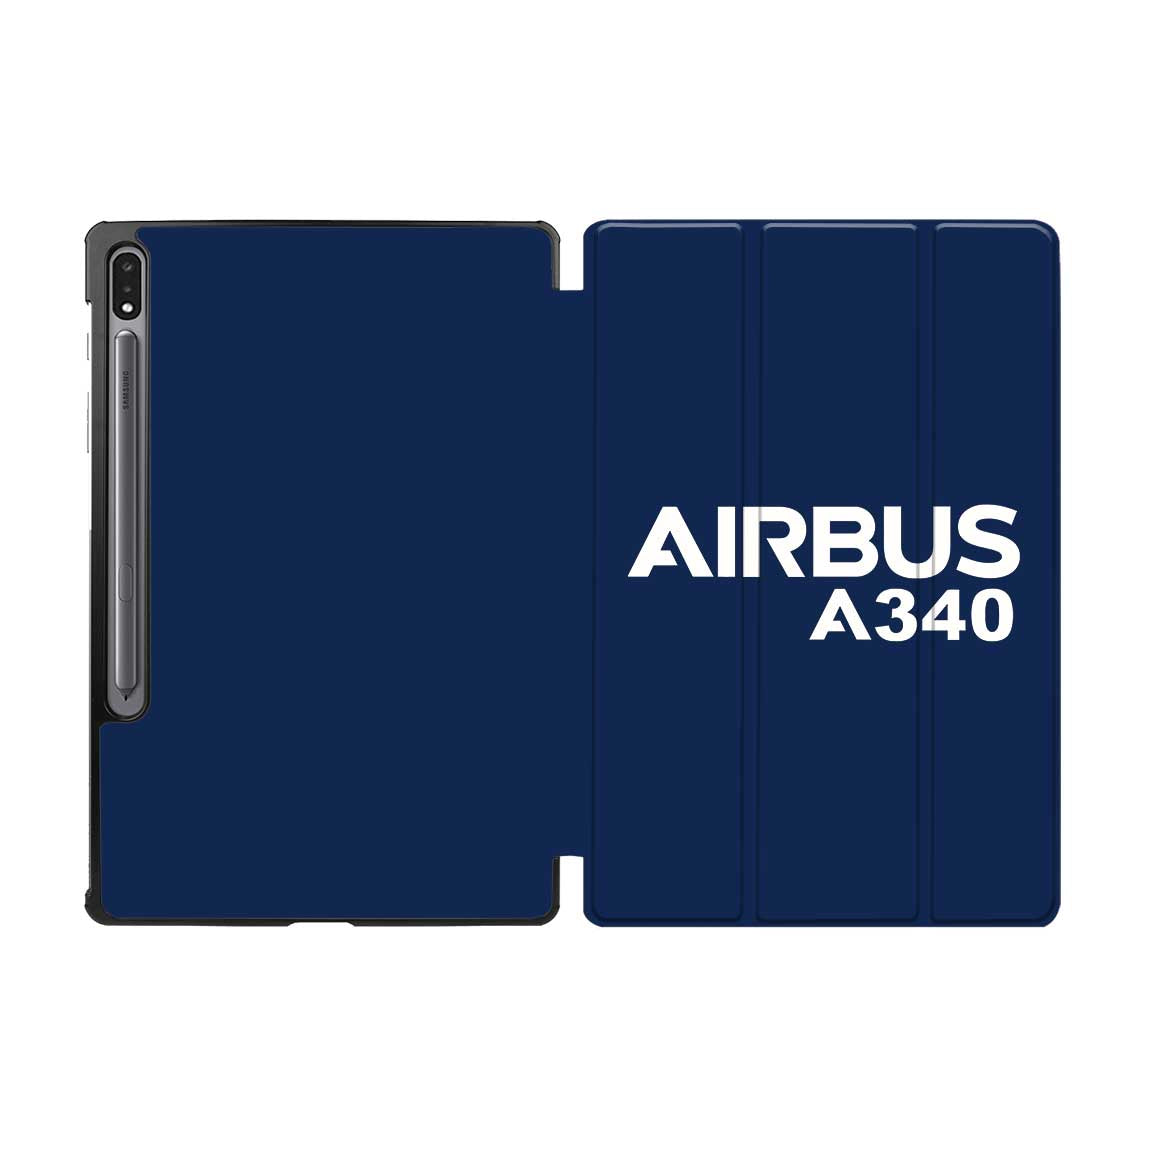 Airbus A340 & Text Designed Samsung Tablet Cases